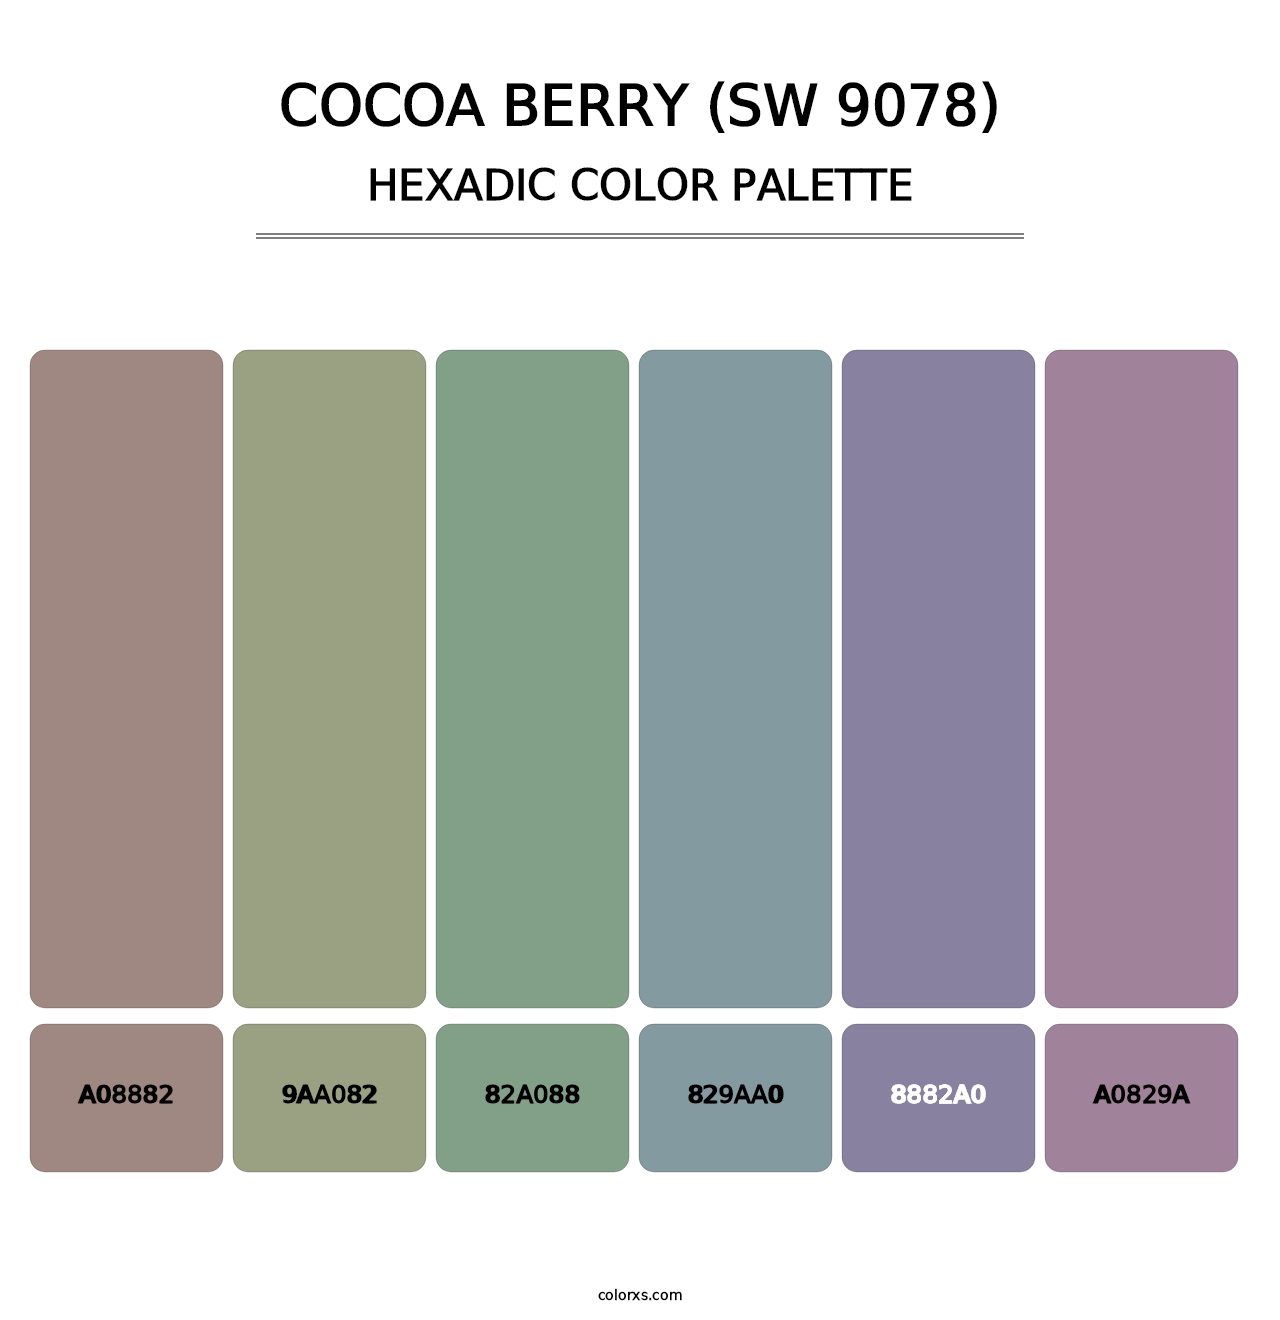 Cocoa Berry (SW 9078) - Hexadic Color Palette